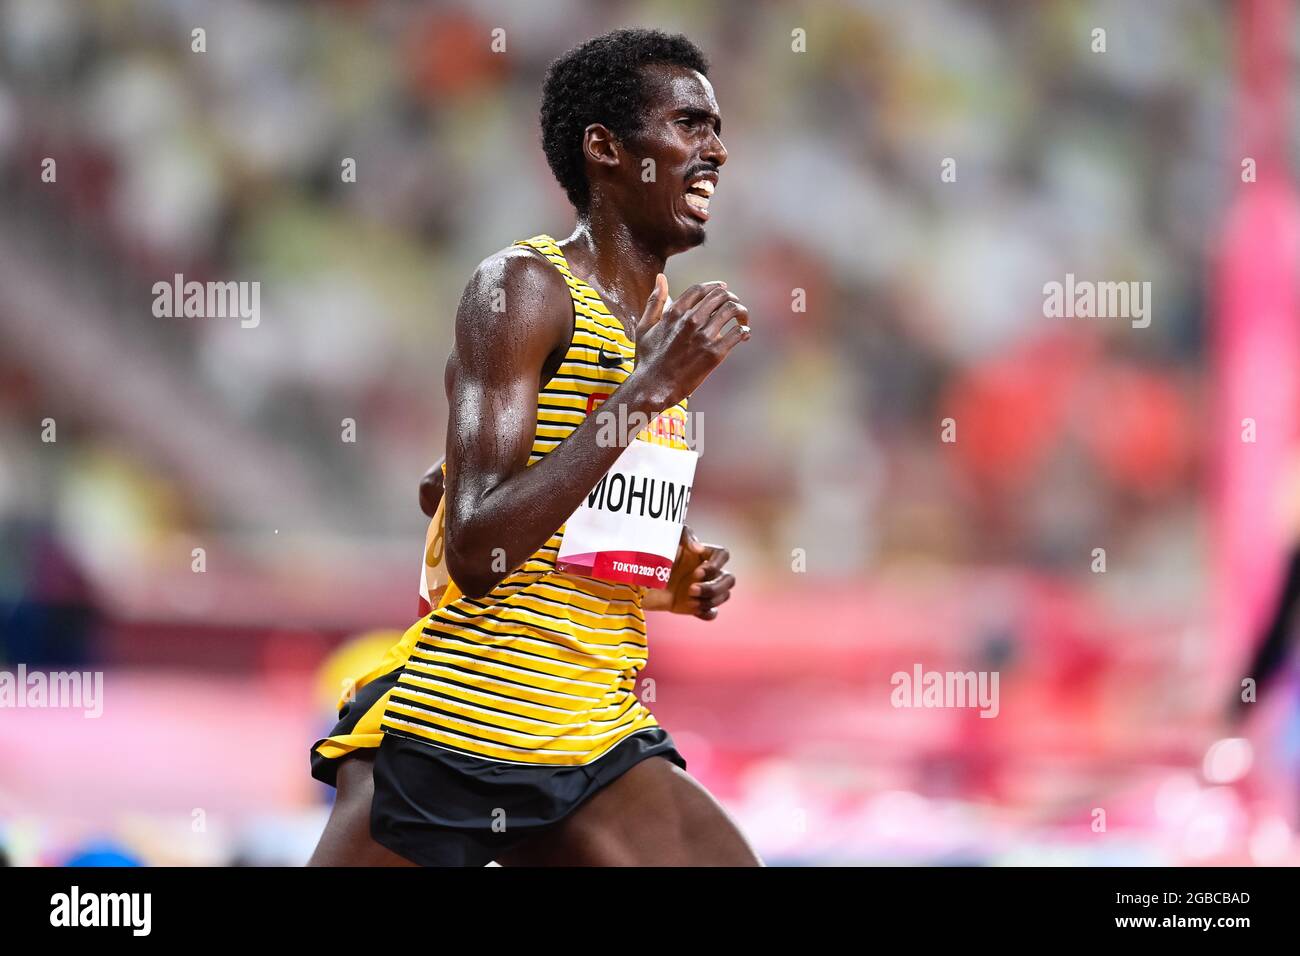 TOKYO, JAPAN - AUGUST 3: Mohamed Mohumed of Germany competing on Men's 5000m Round 1 during the Tokyo 2020 Olympic Games at the Olympic Stadium on August 3, 2021 in Tokyo, Japan (Photo by Andy Astfalck/Orange Pictures) Stock Photo